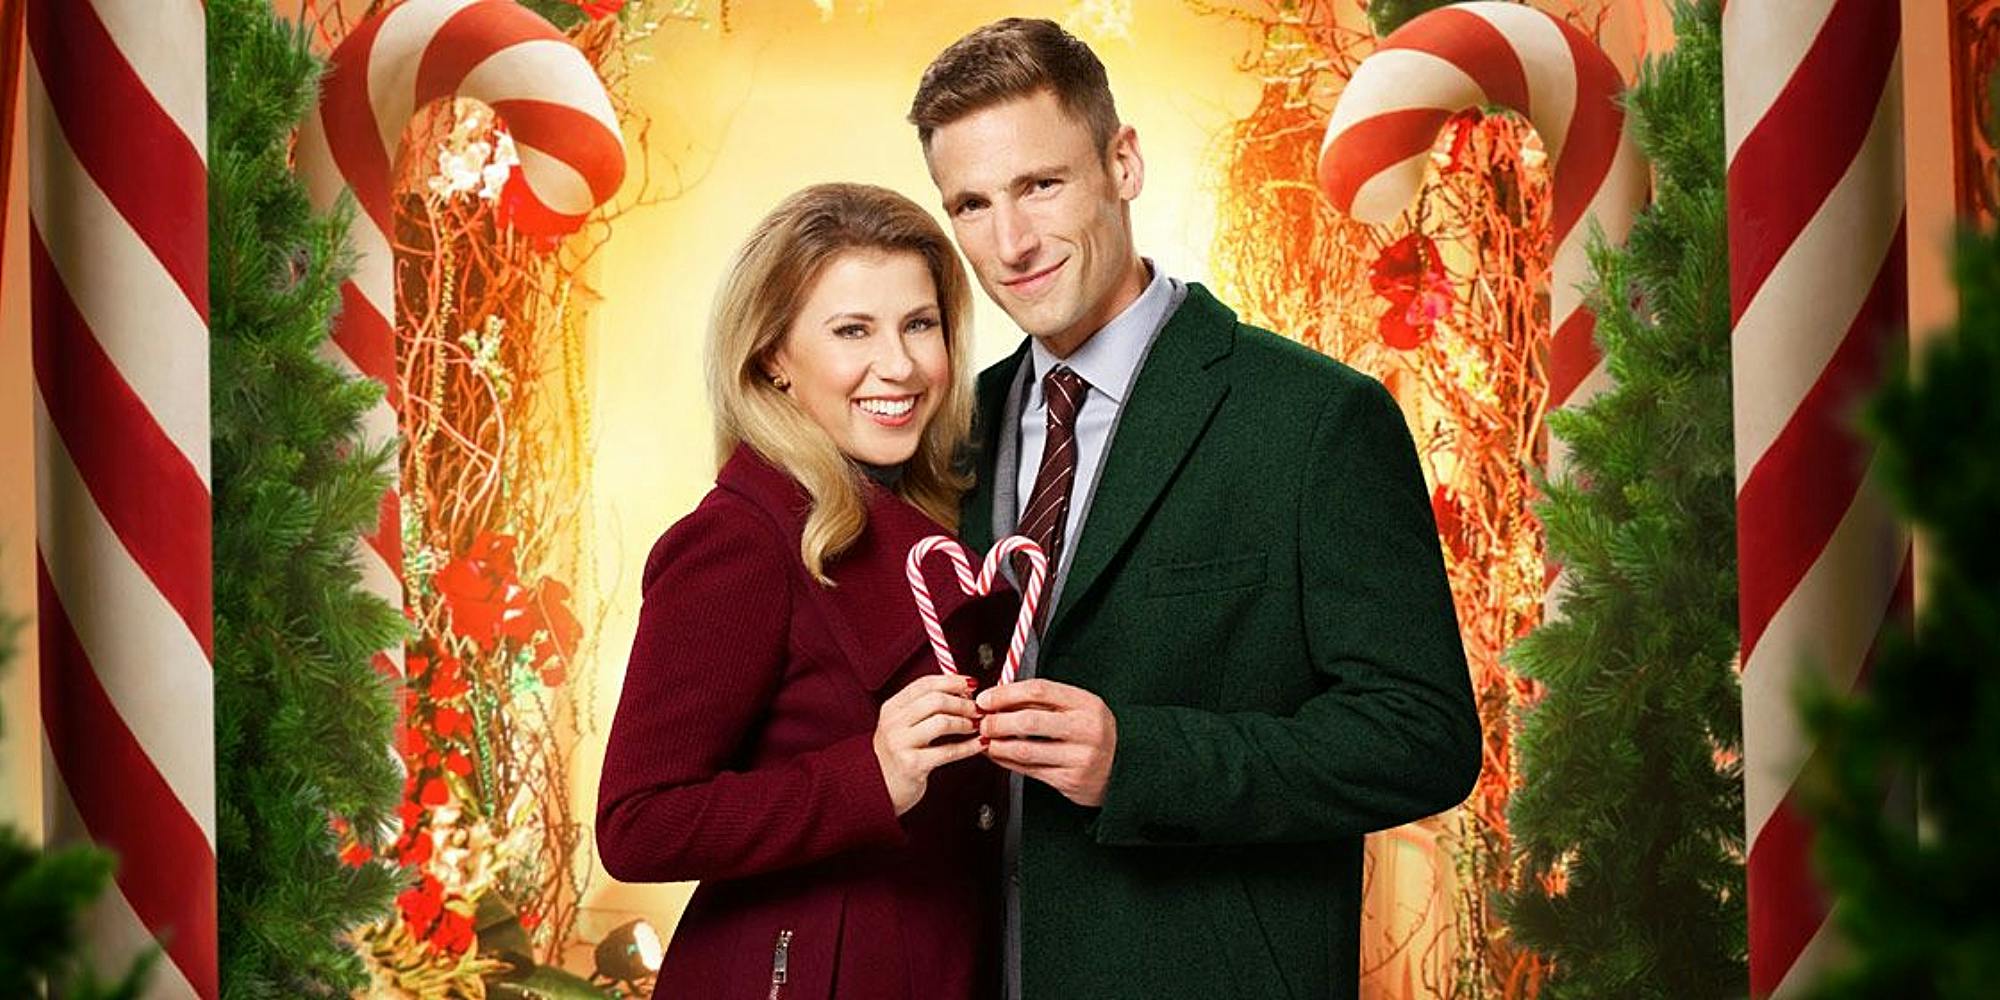 merry and bright hallmark christmas movies watch guide